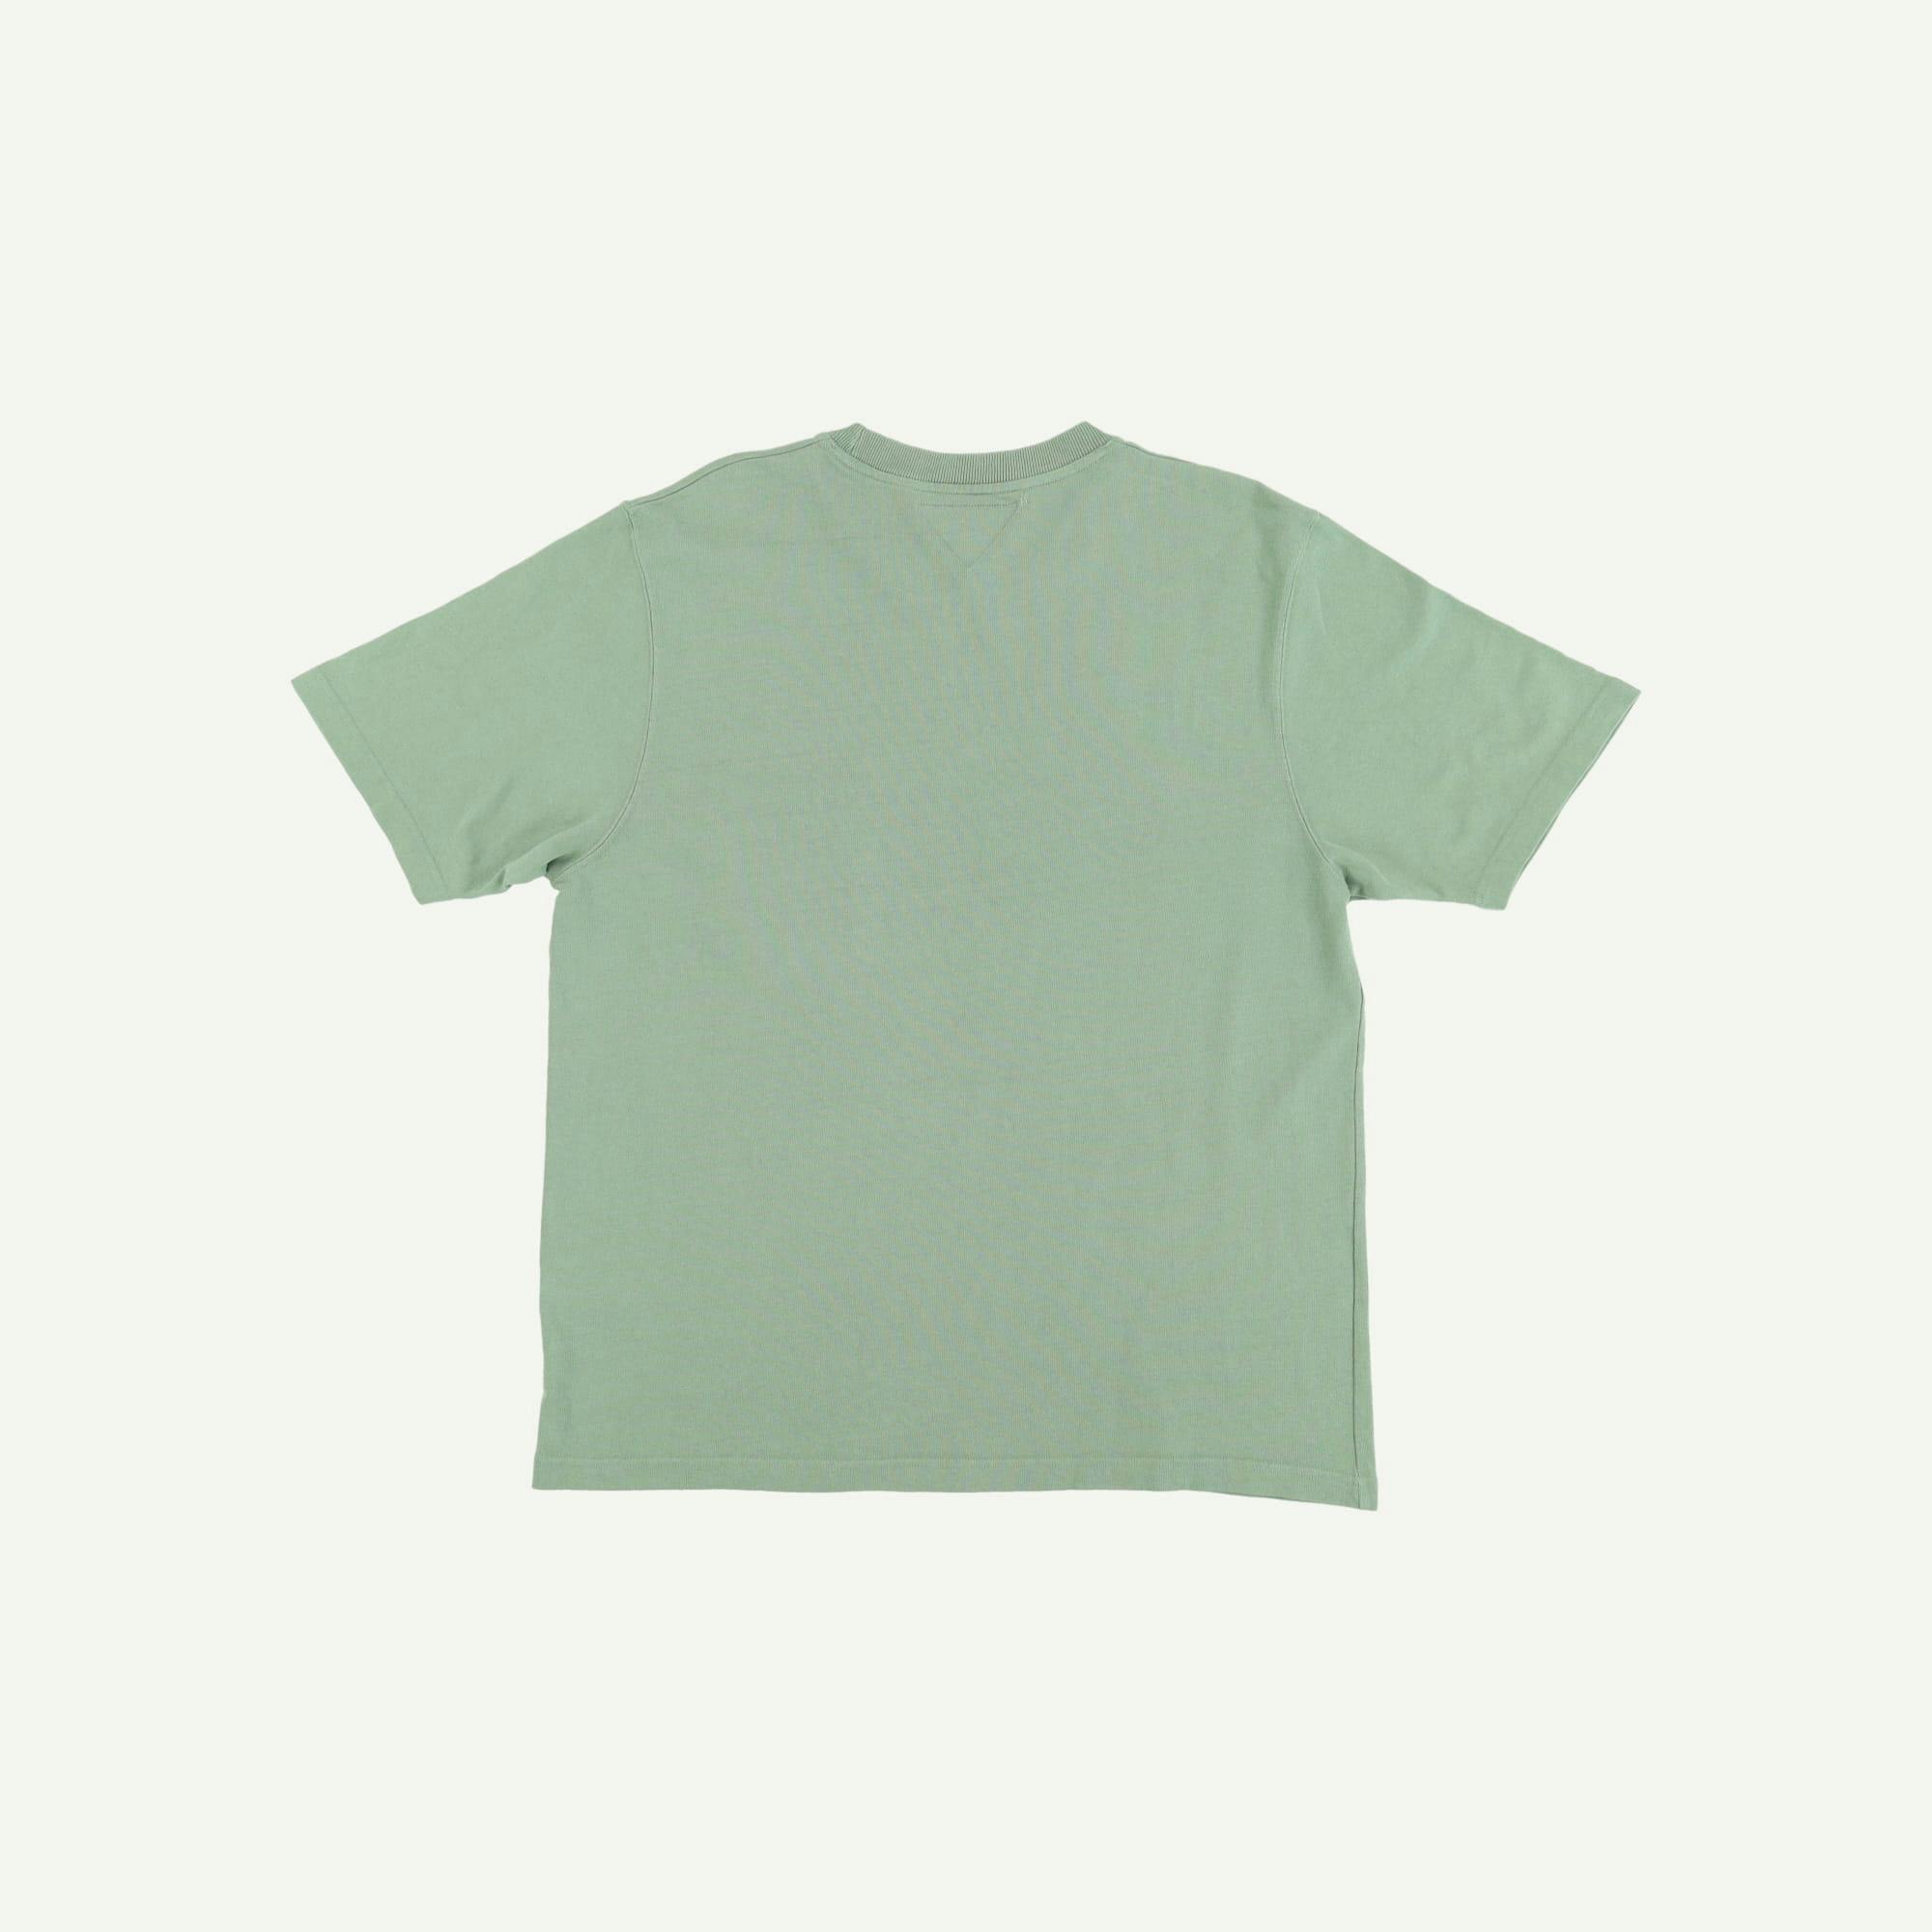 Finisterre Pre-loved Green T-Shirt